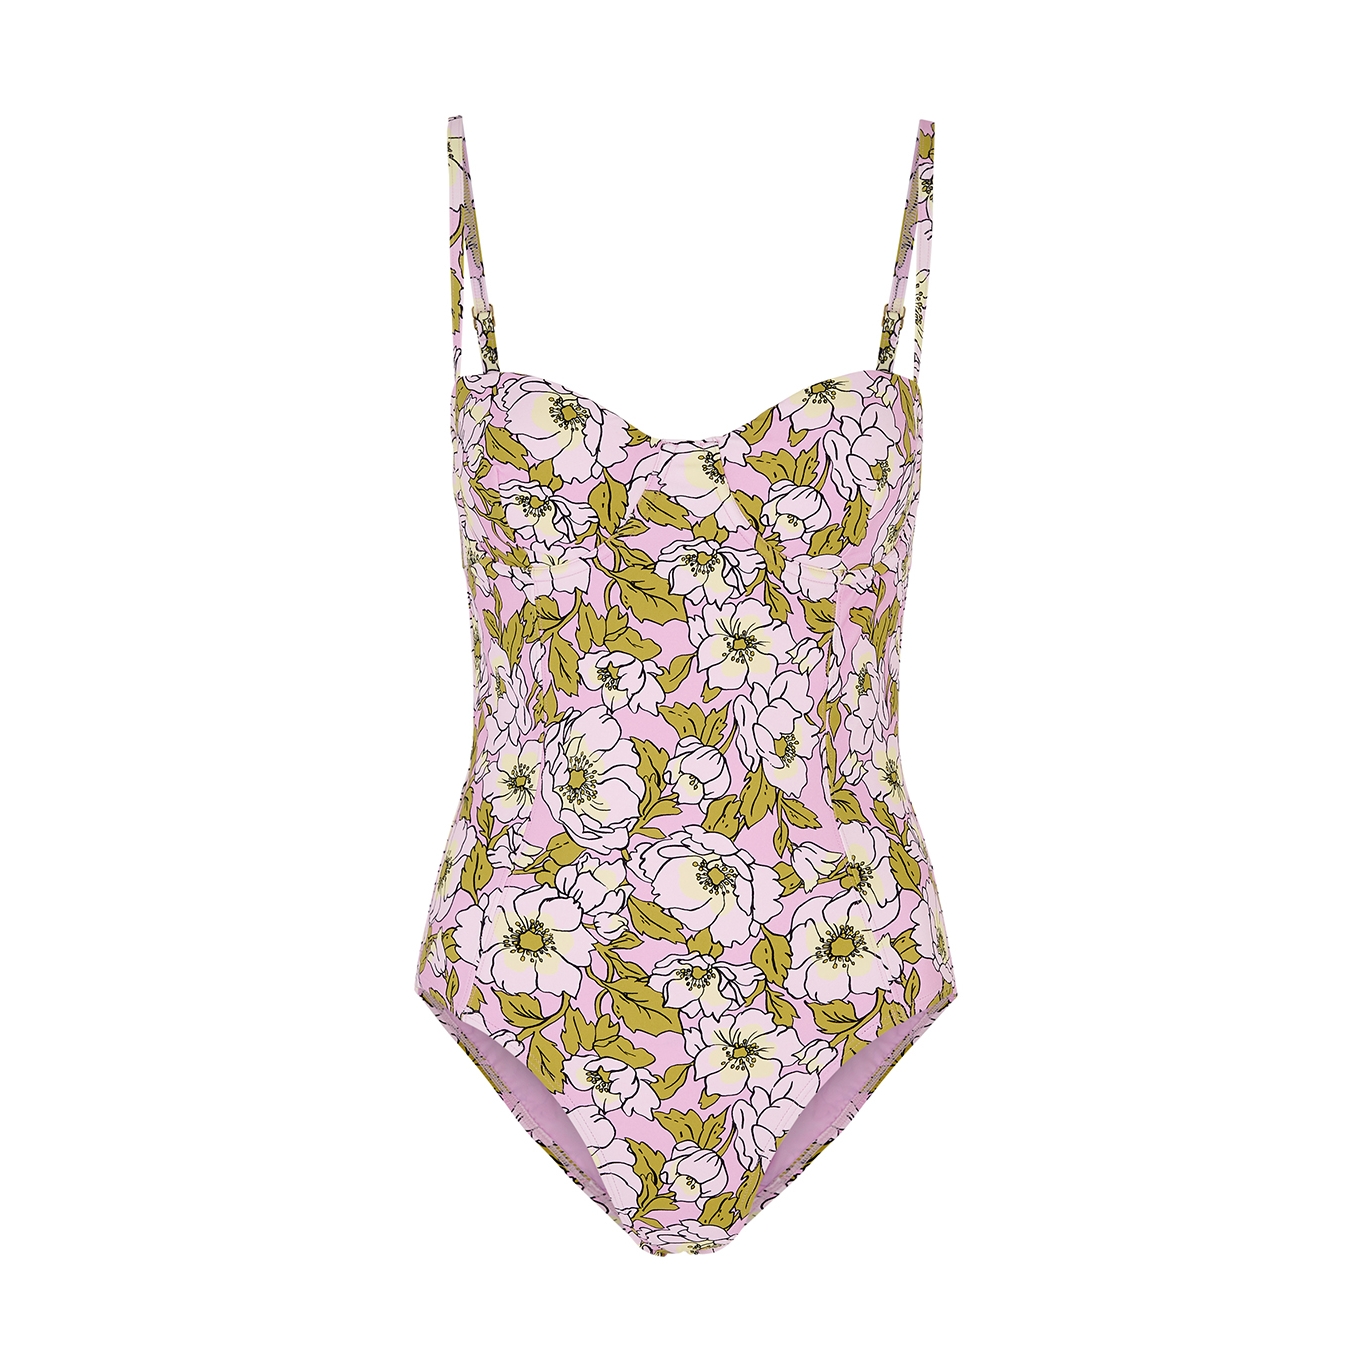 TORY BURCH FLORAL-PRINT UNDERWIRED SWIMSUIT